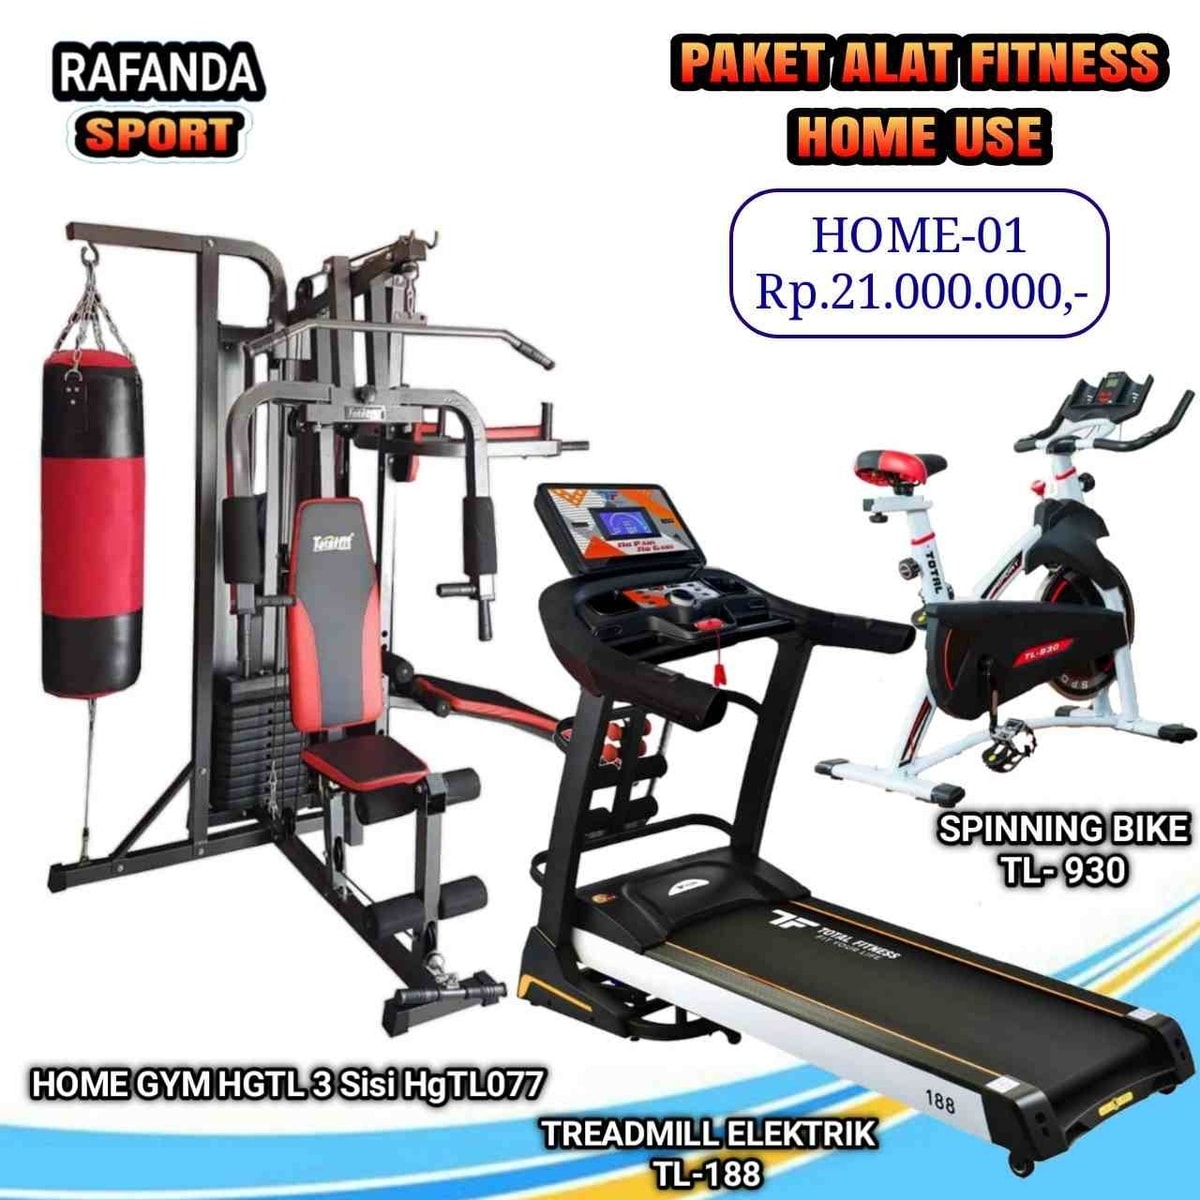 Paket Fitness Home Use - Home 3